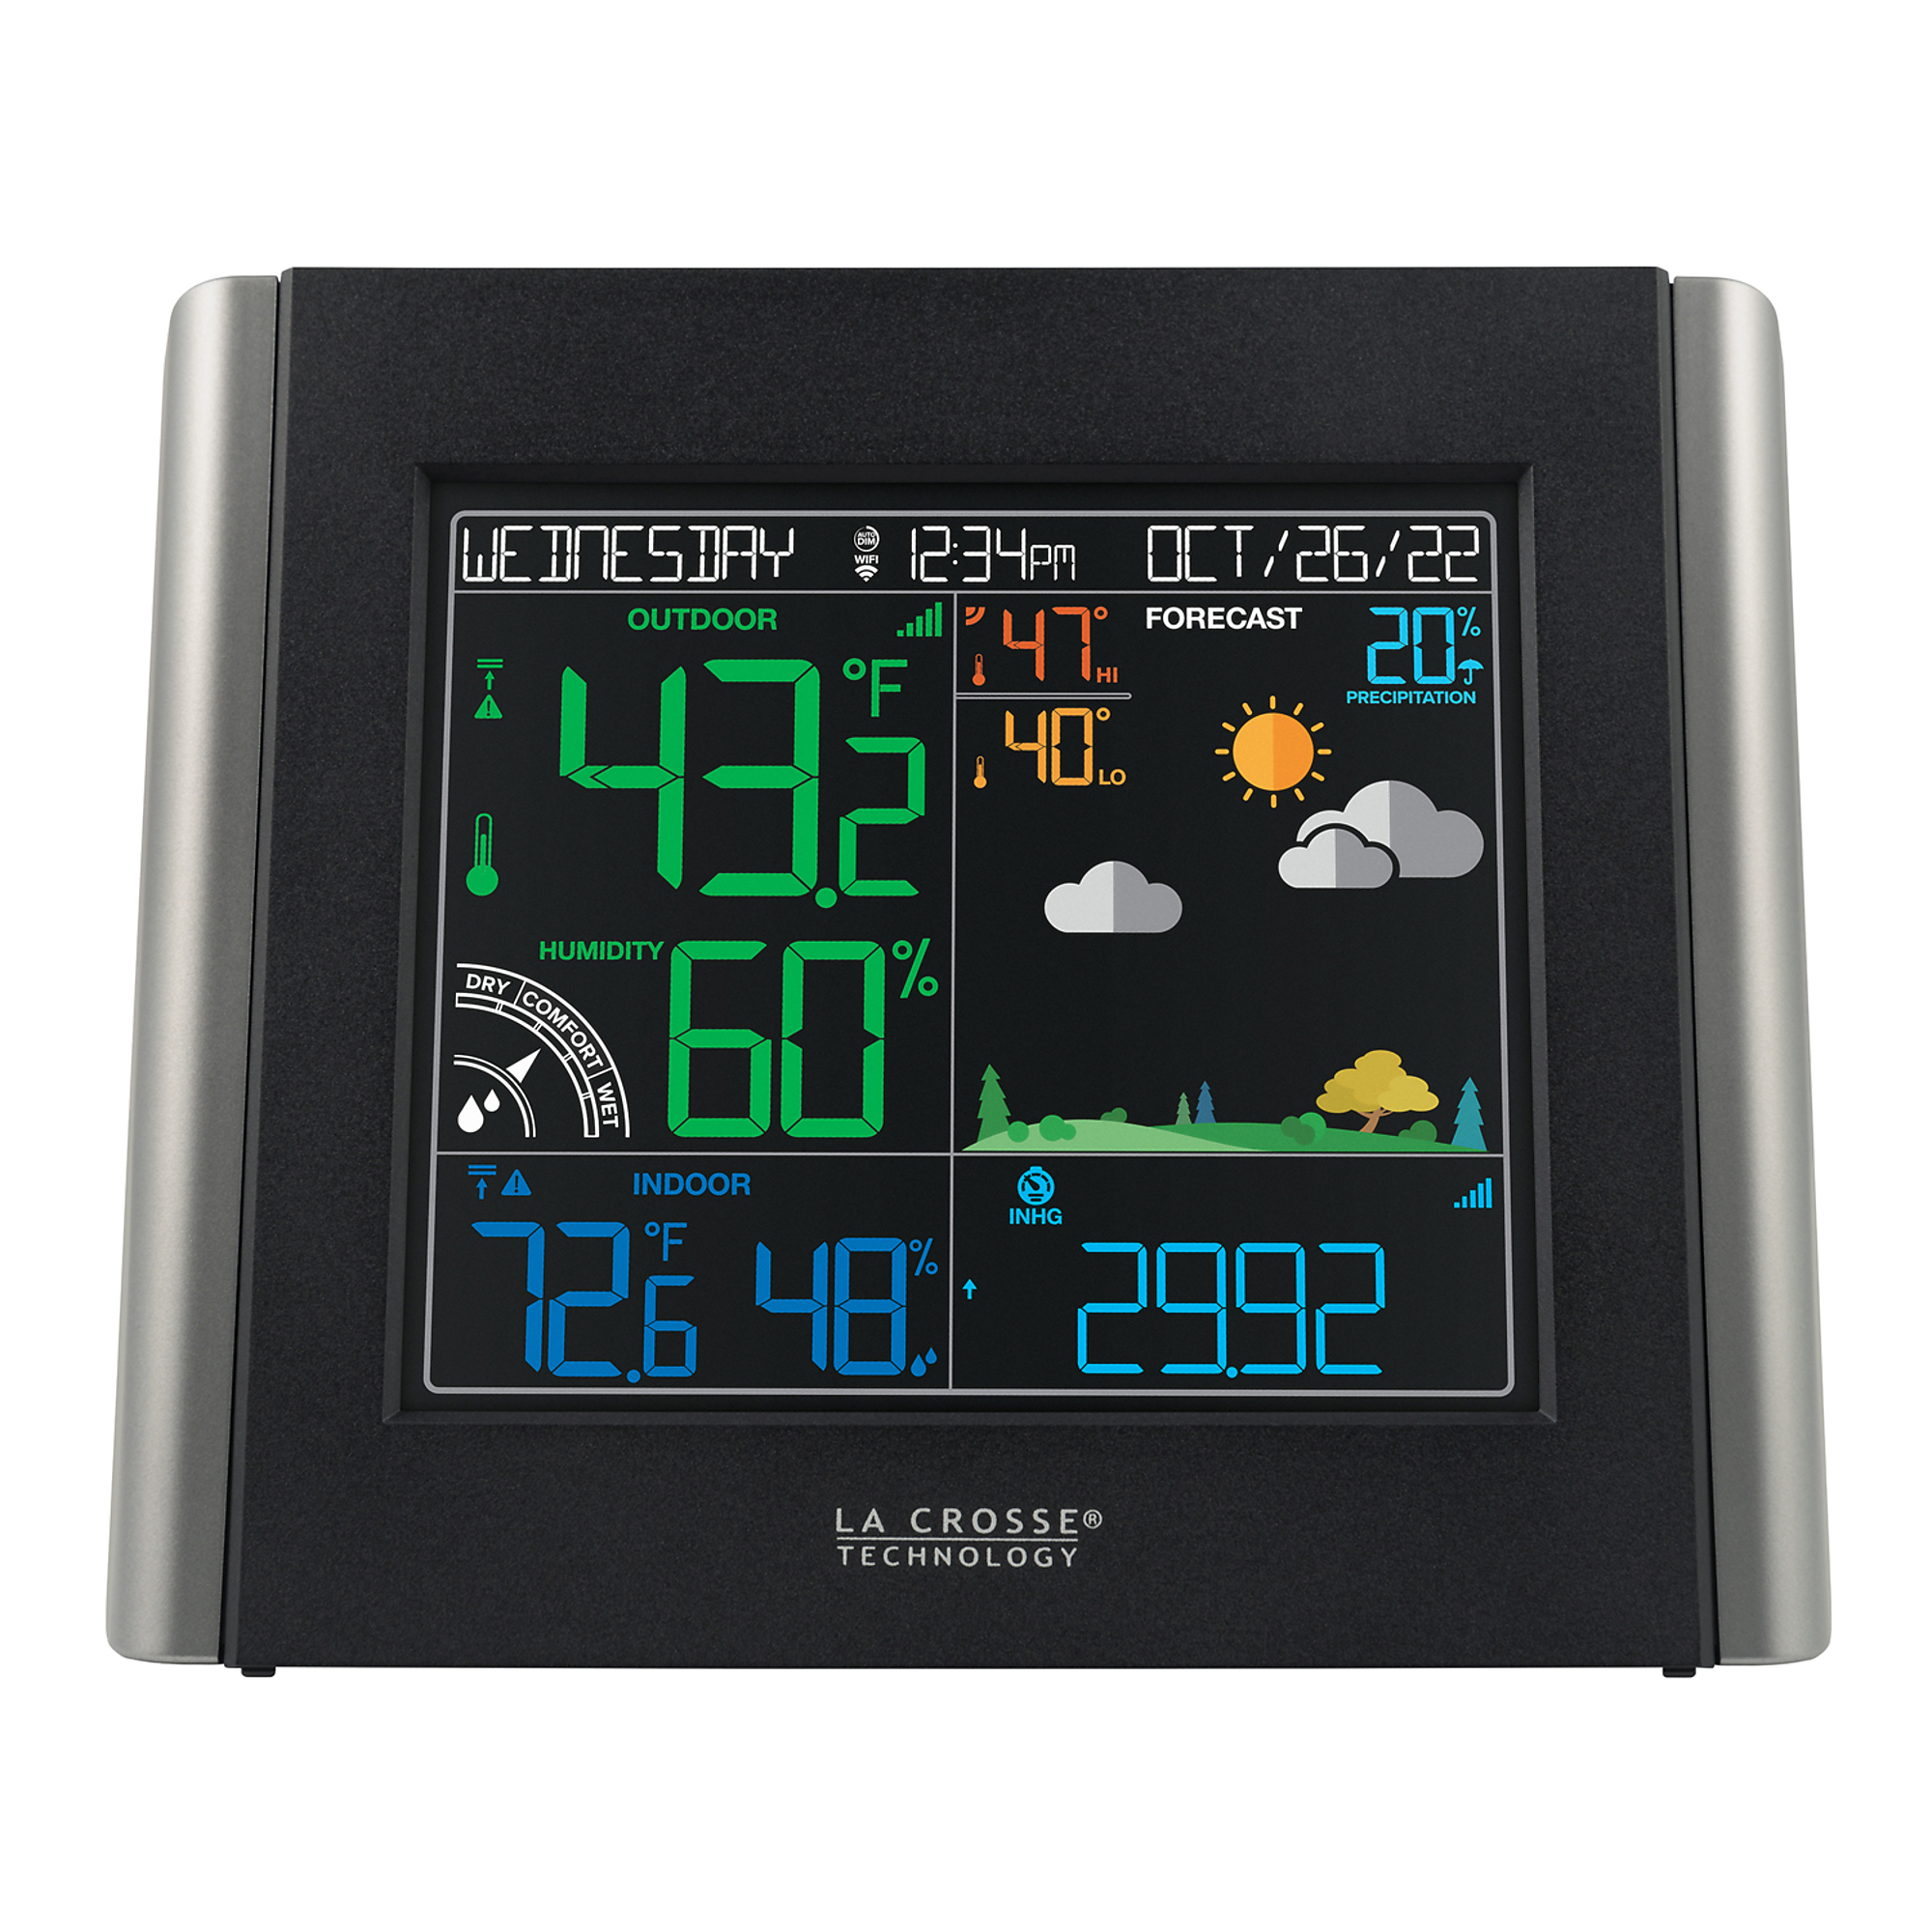 LaCrosse Technology, Wireless Wi-Fi Weather Station, Display Type LED, Model V11-TH